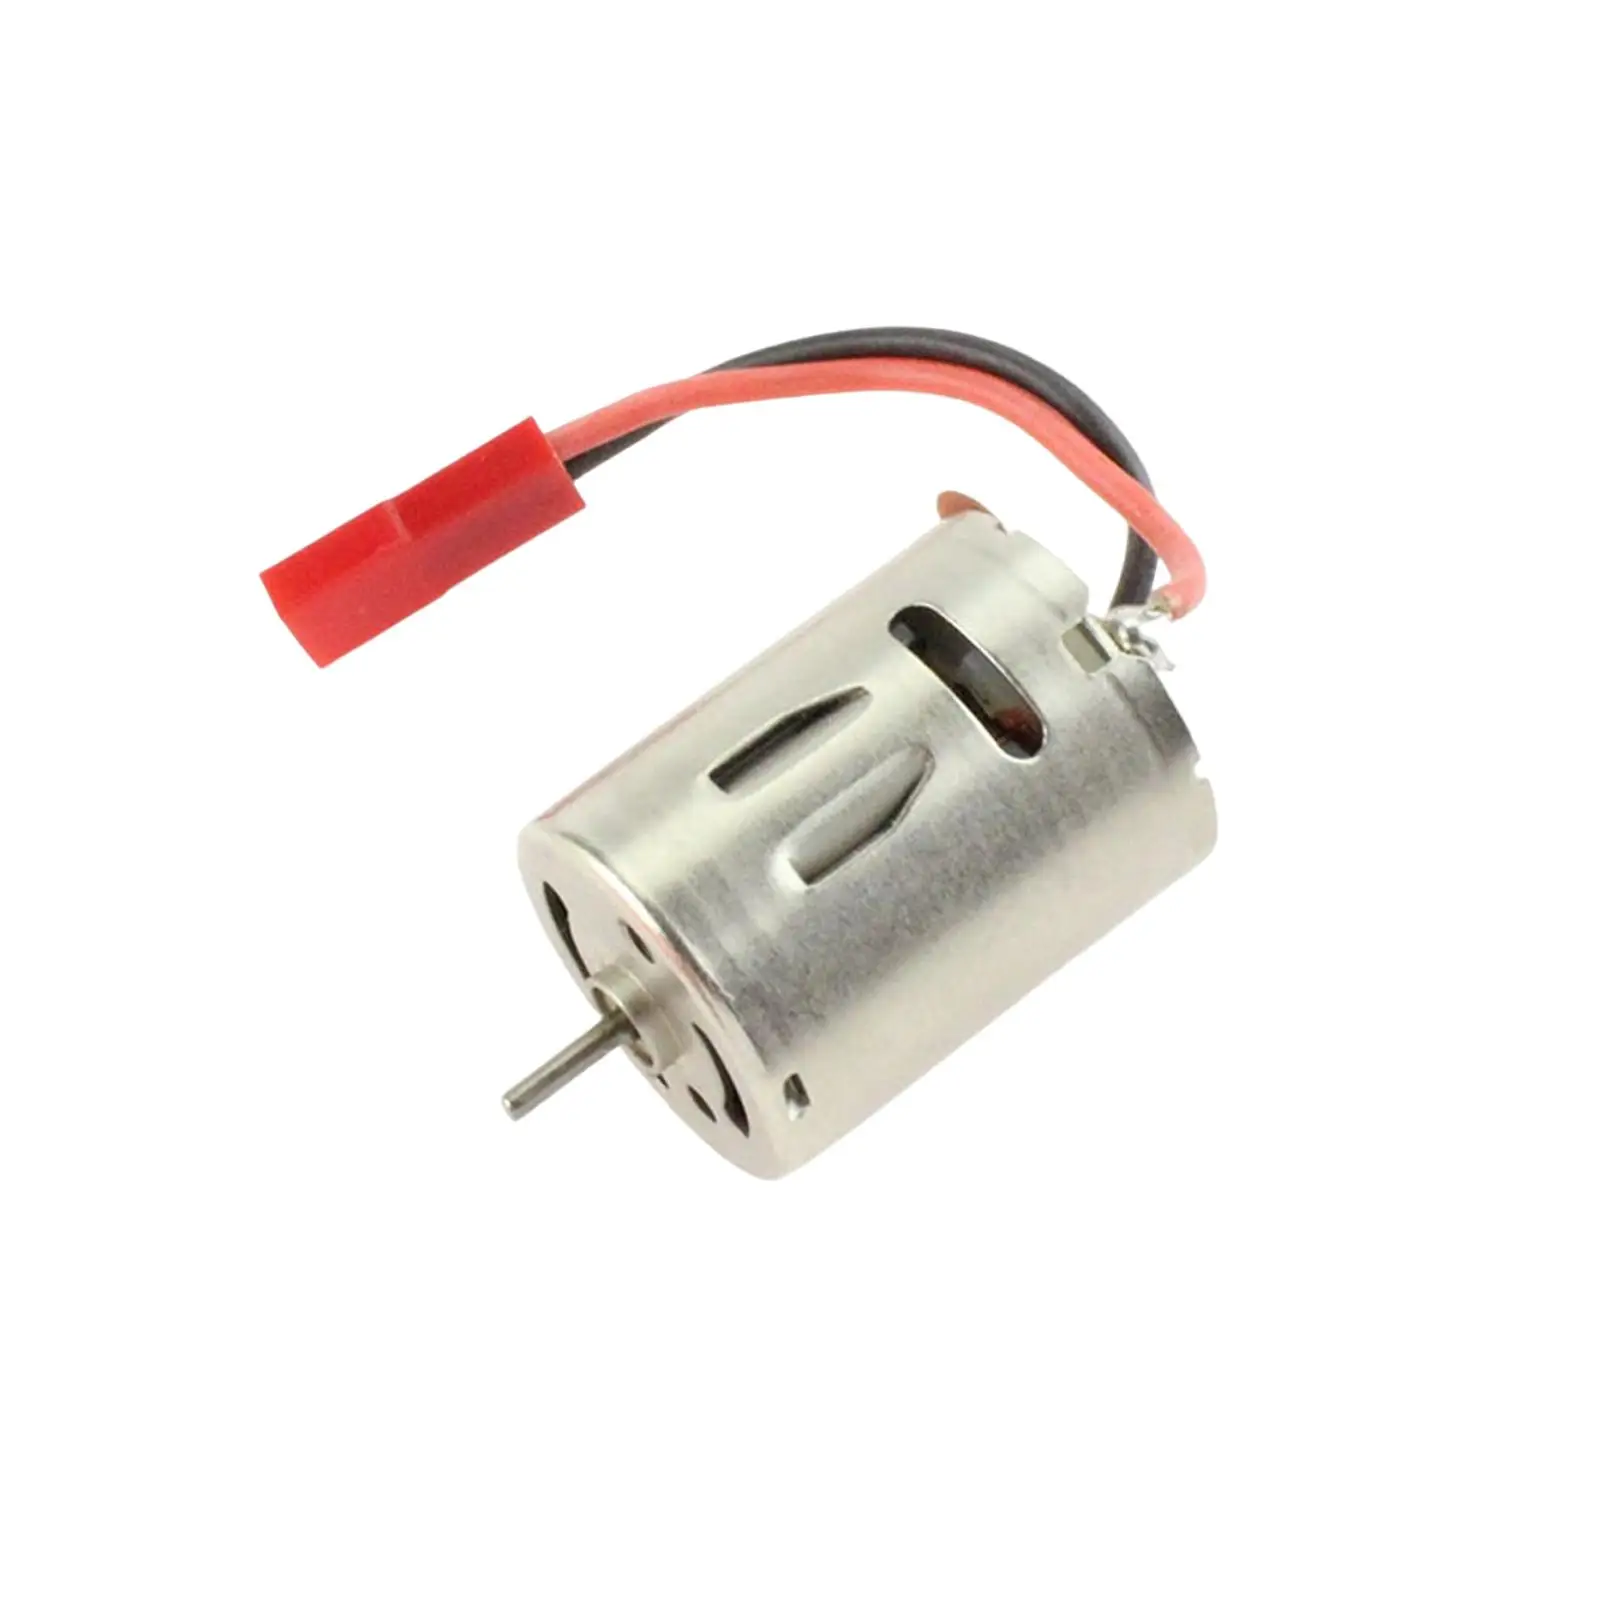 Metal RC Electric Boat Motor Upgrade for WL917-24 Speedboat RC Ship DIY Accs Parts